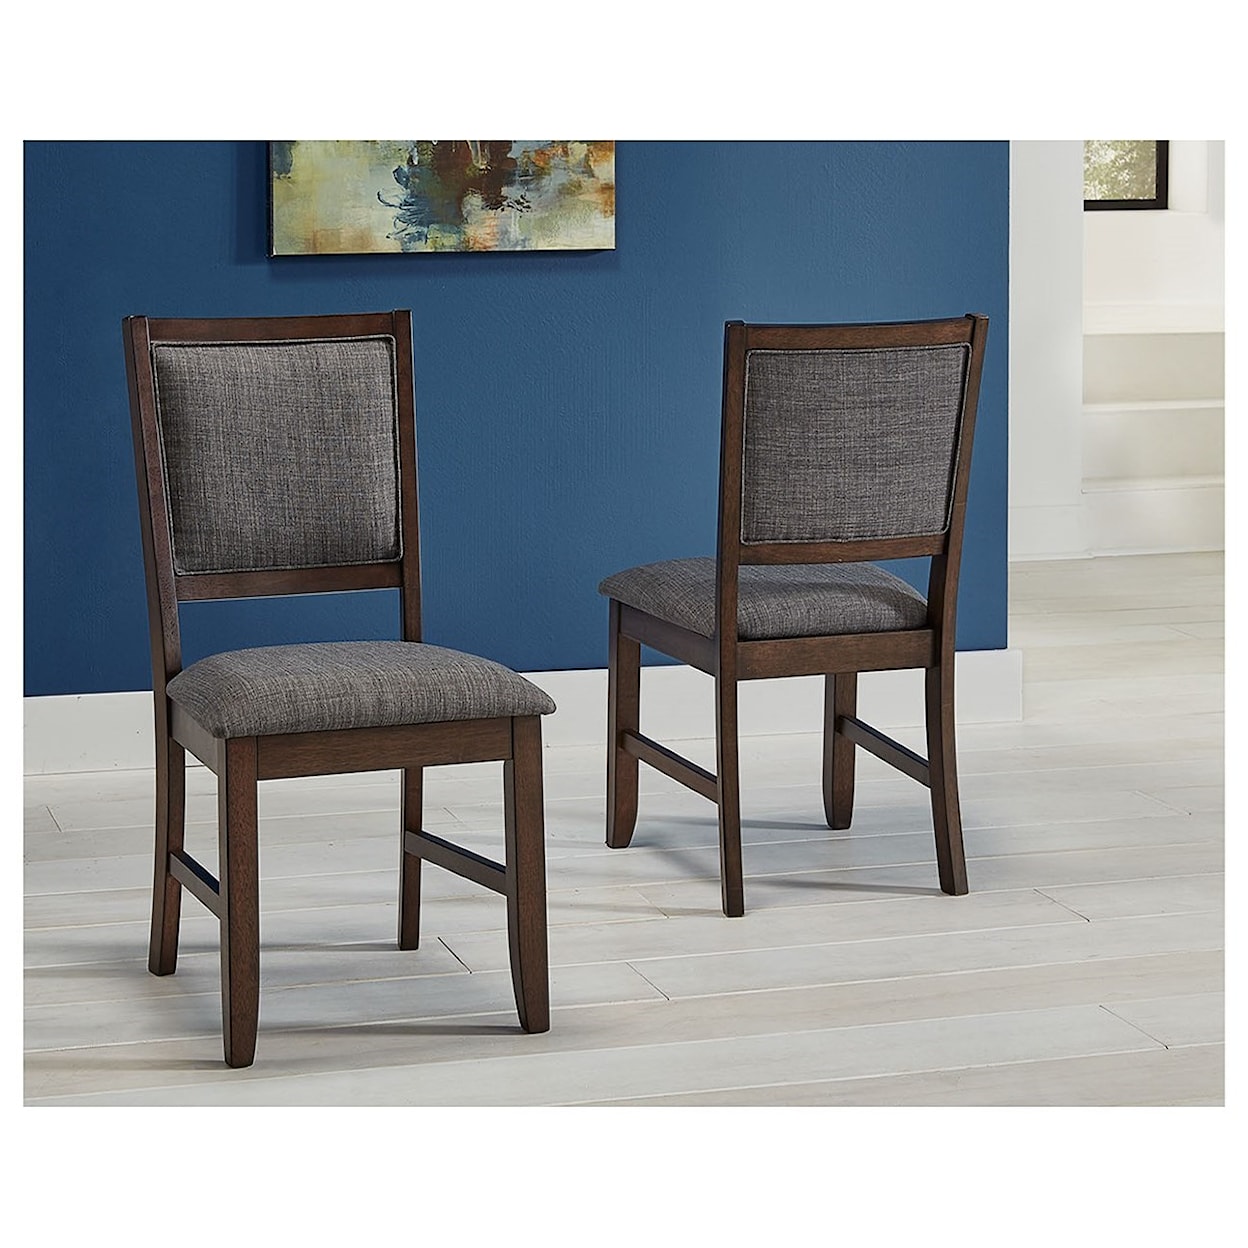 AAmerica Chesney Upholstered Side Chair